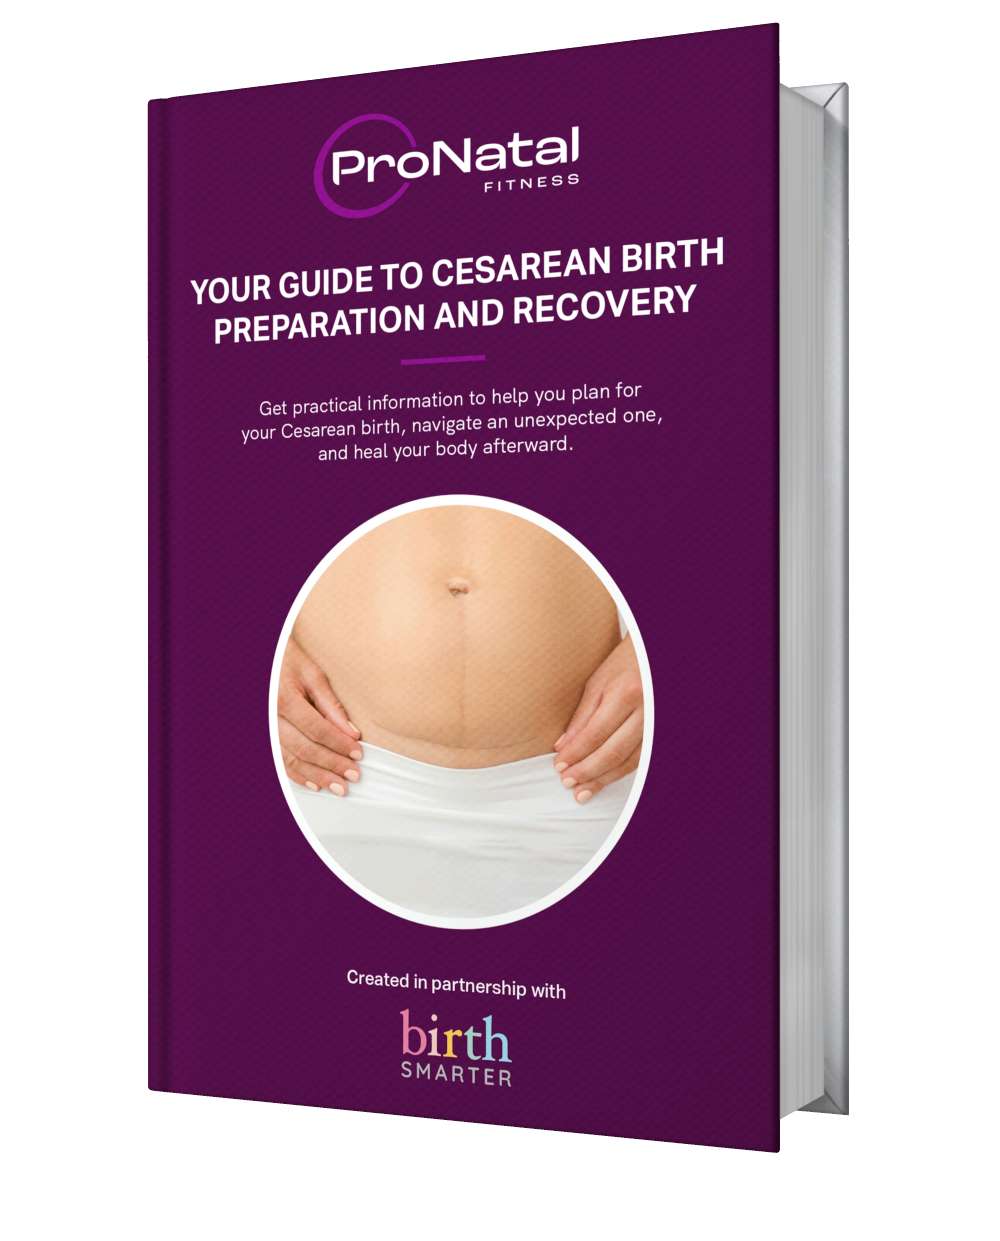 C-Section Guide - ProNatal Fitness